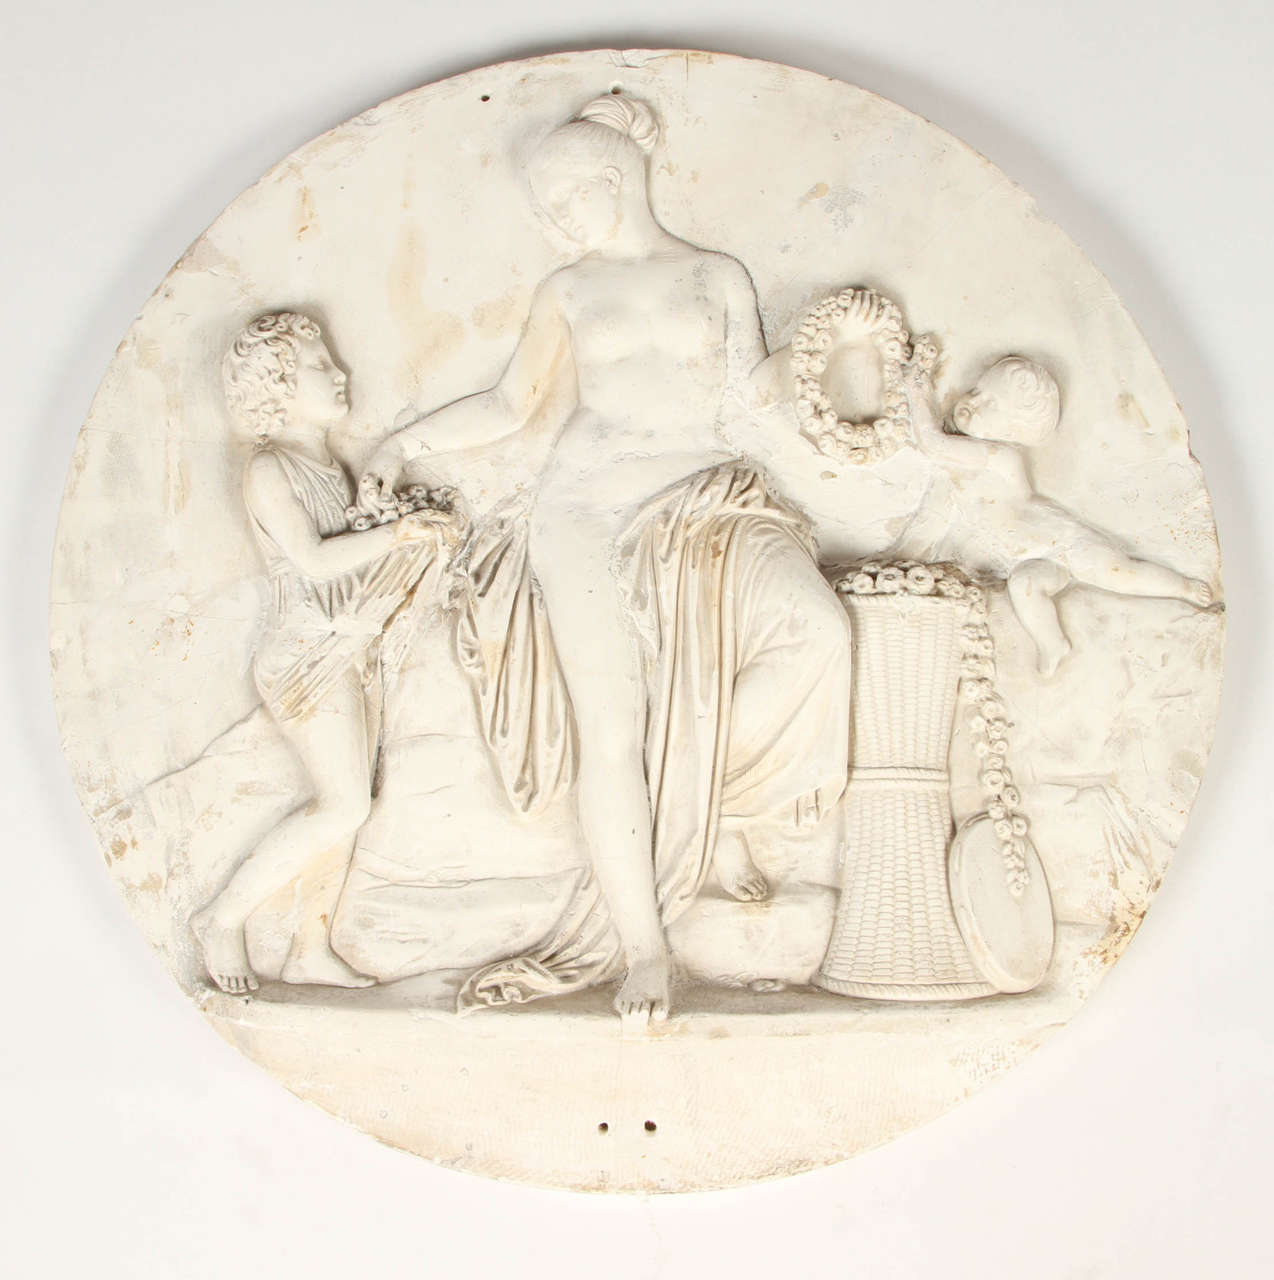 Each of these plaster roundels depict one of the four seasons in the neoclassical style that Bertel Thorvaldsen was famous for. This collection is one of the larger scaled sets issued from the Thorvaldsen Museum in Copenhagen, Denmark. Romantic and